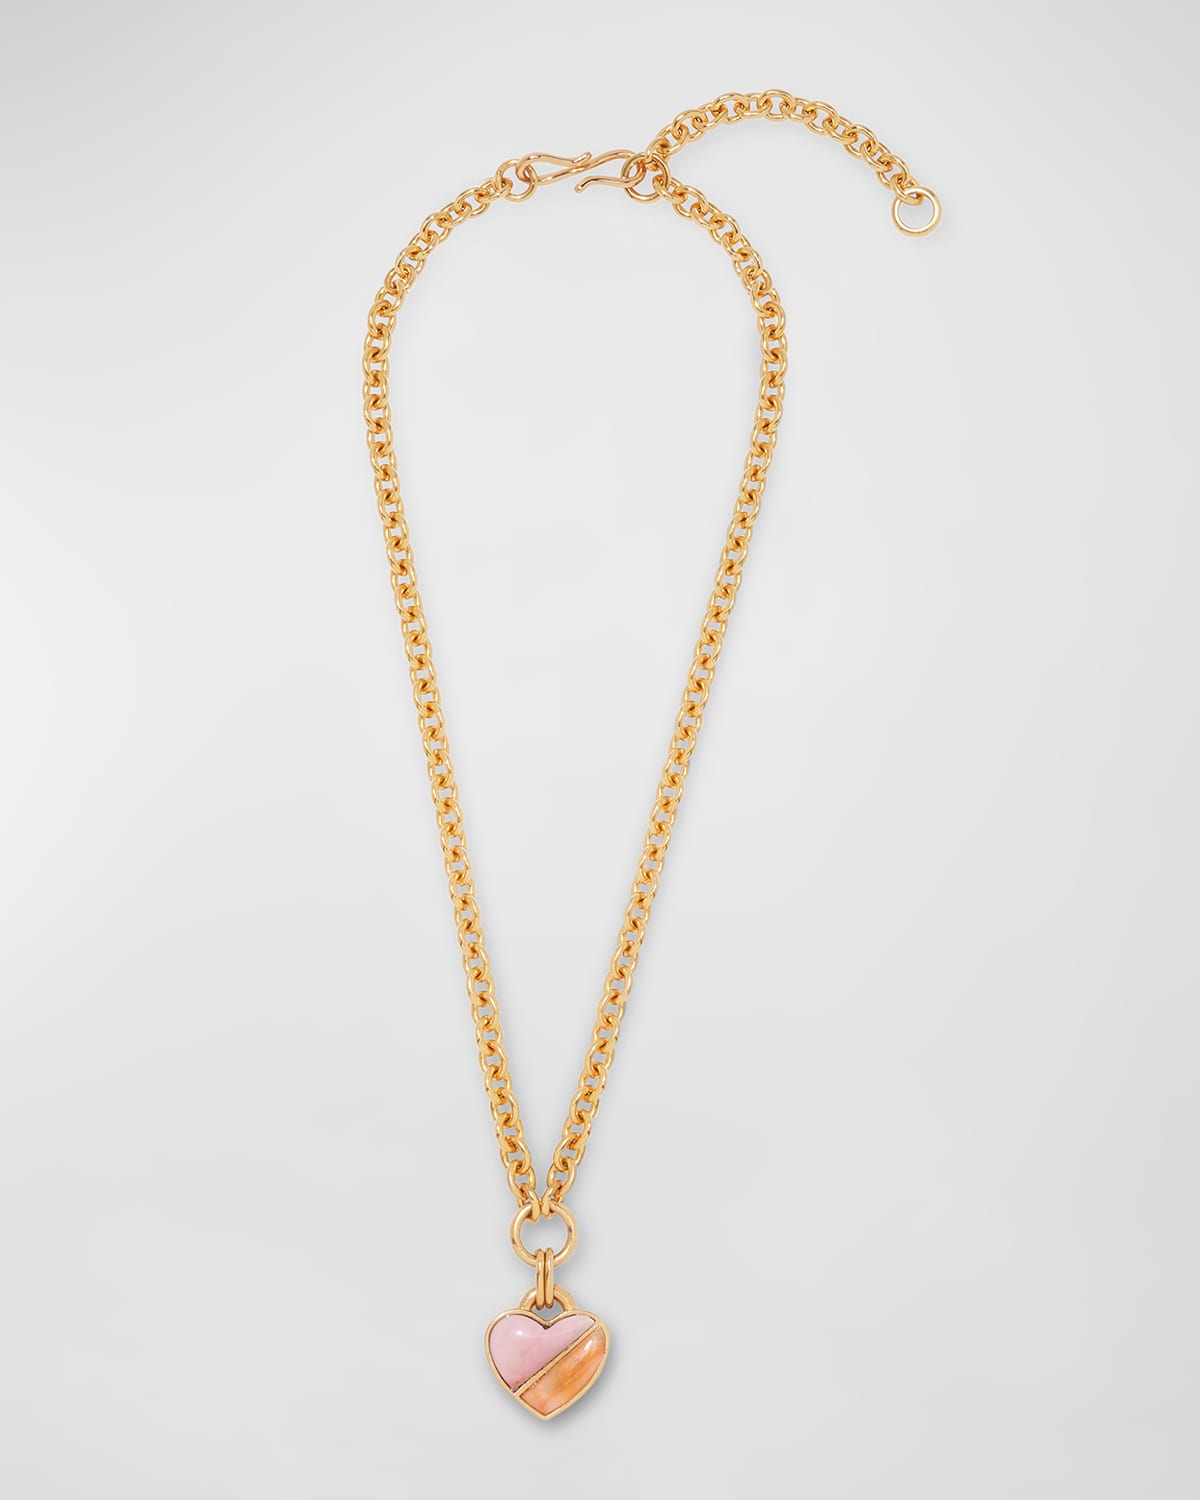 Lizzie Fortunato Atlantic Heart Necklace with Opal